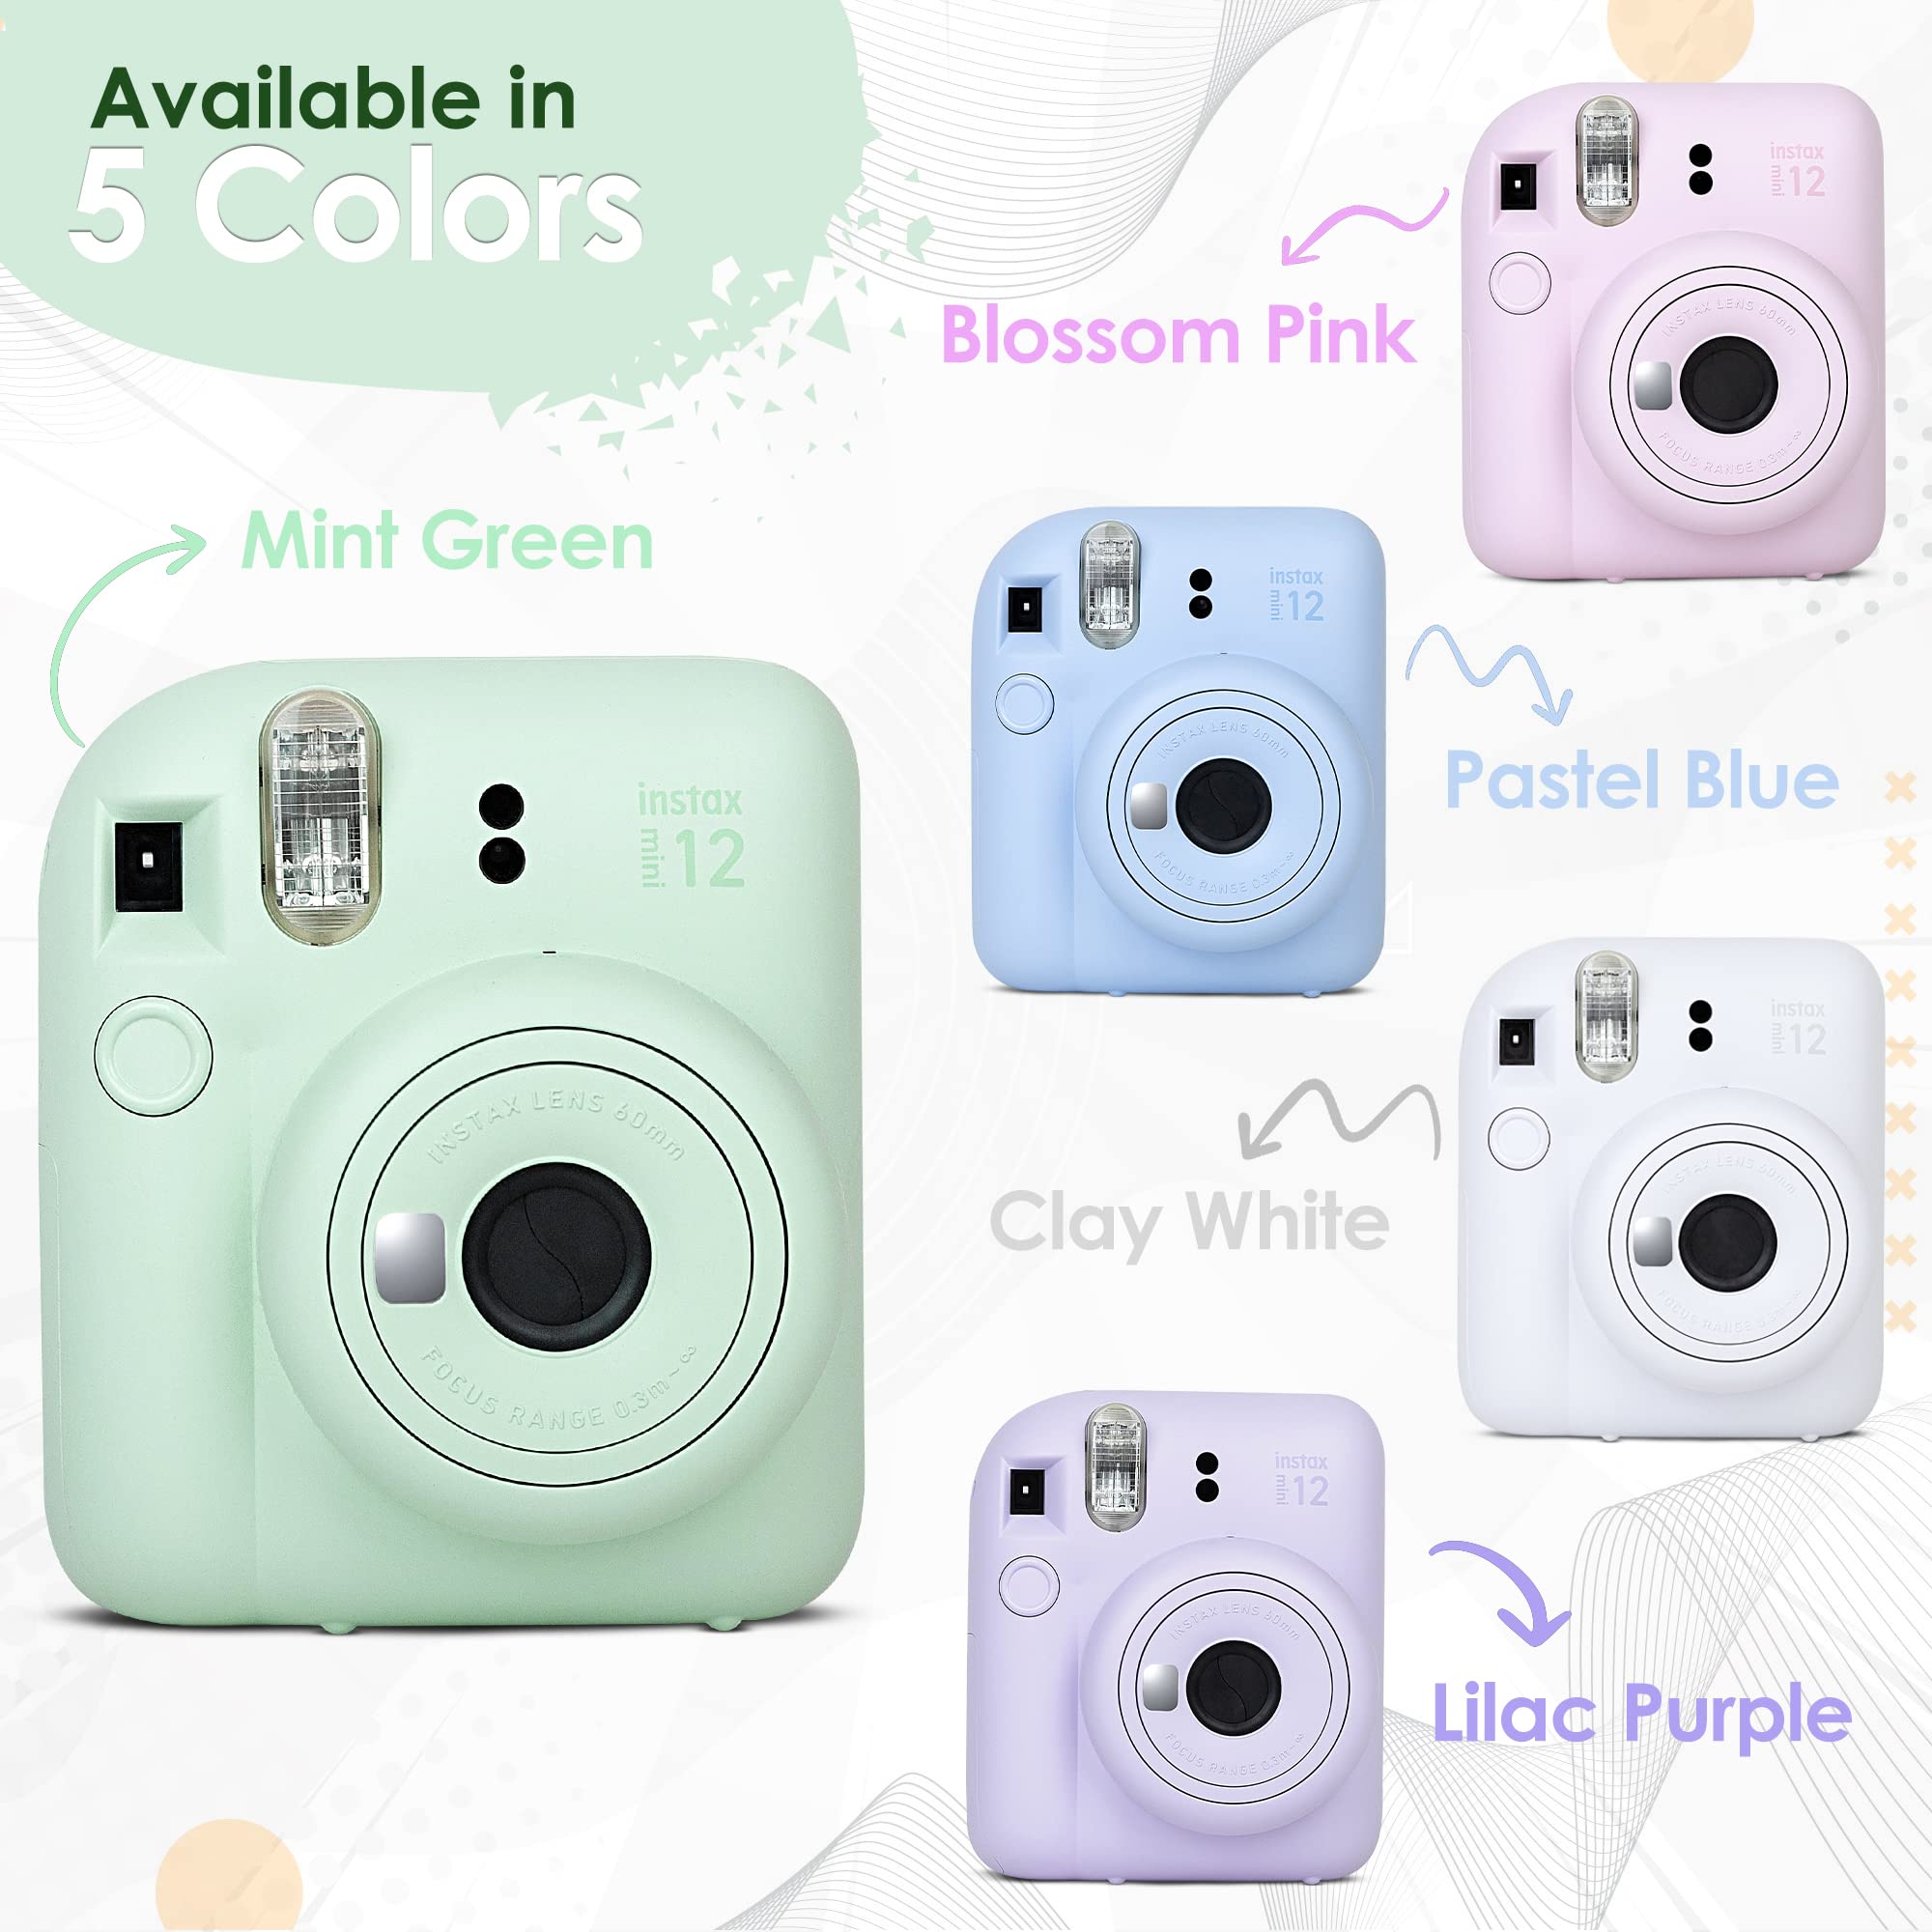 Fujifilm Instax Mini 12 Camera with Fujifilm Instant Mini Film (60 Sheets) Bundle with Deals Number One Accessories Including Carrying Case, Photo Album, Stickers (Clay White)